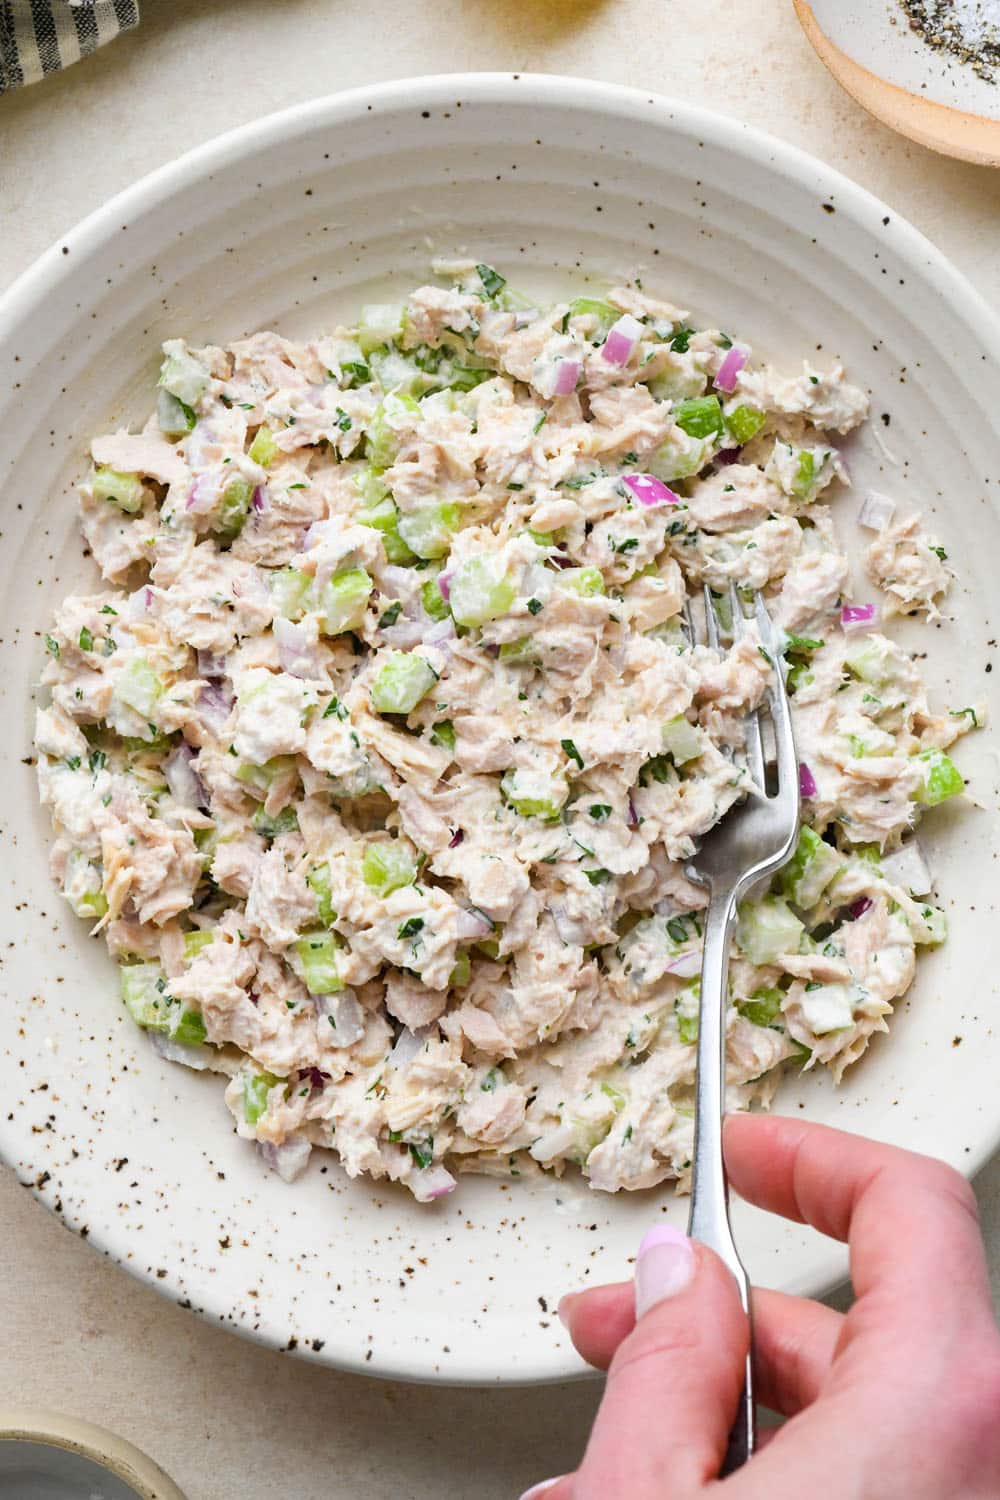 How to make tuna salad: All ingredients for tuna salad mixed together in a large bowl.